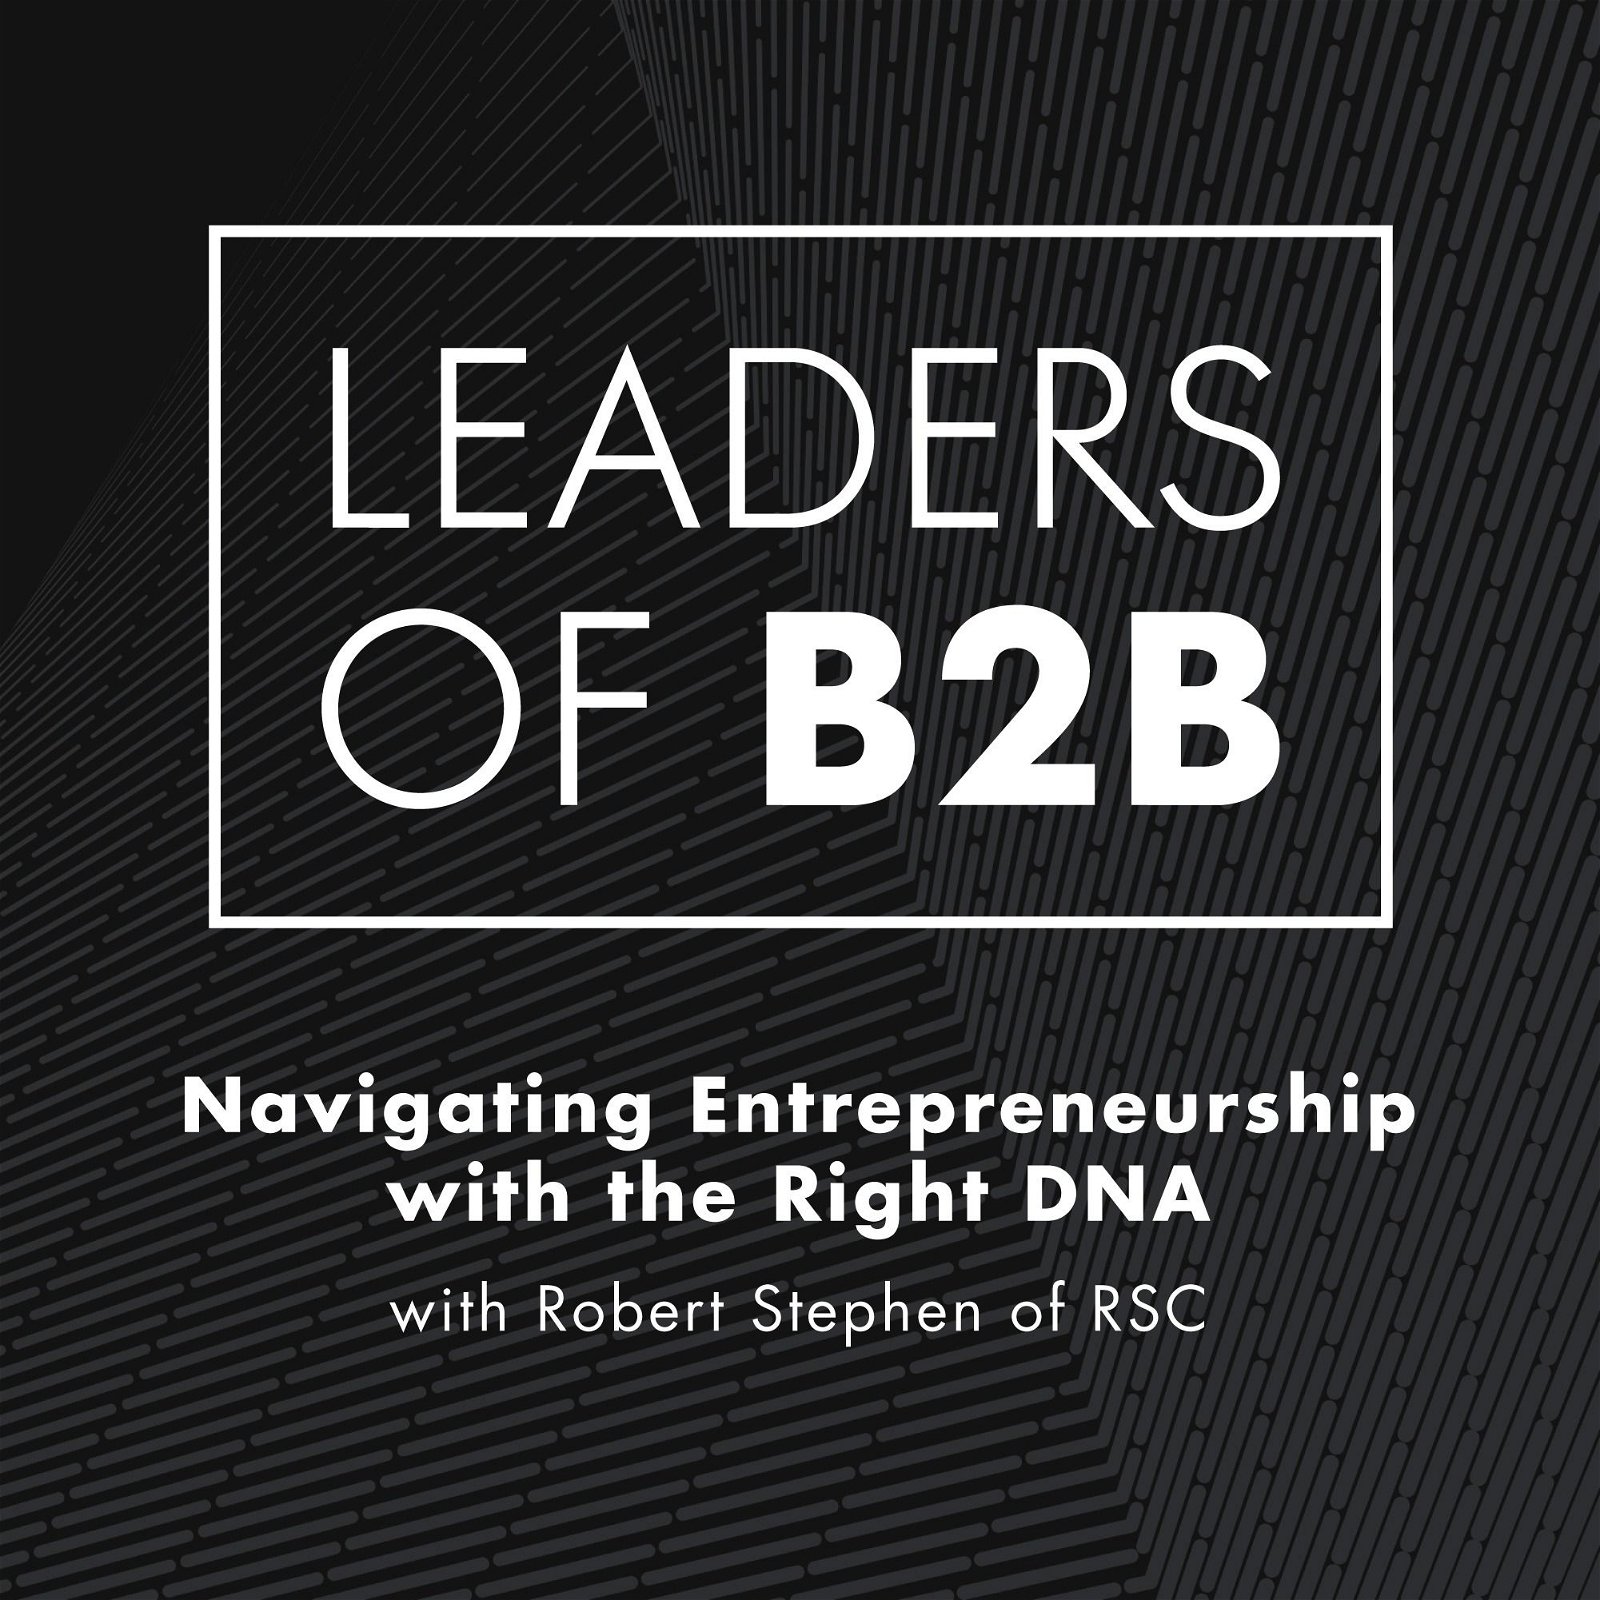 Navigating Entrepreneurship with the Right DNA, with Robert Stephen of RSC